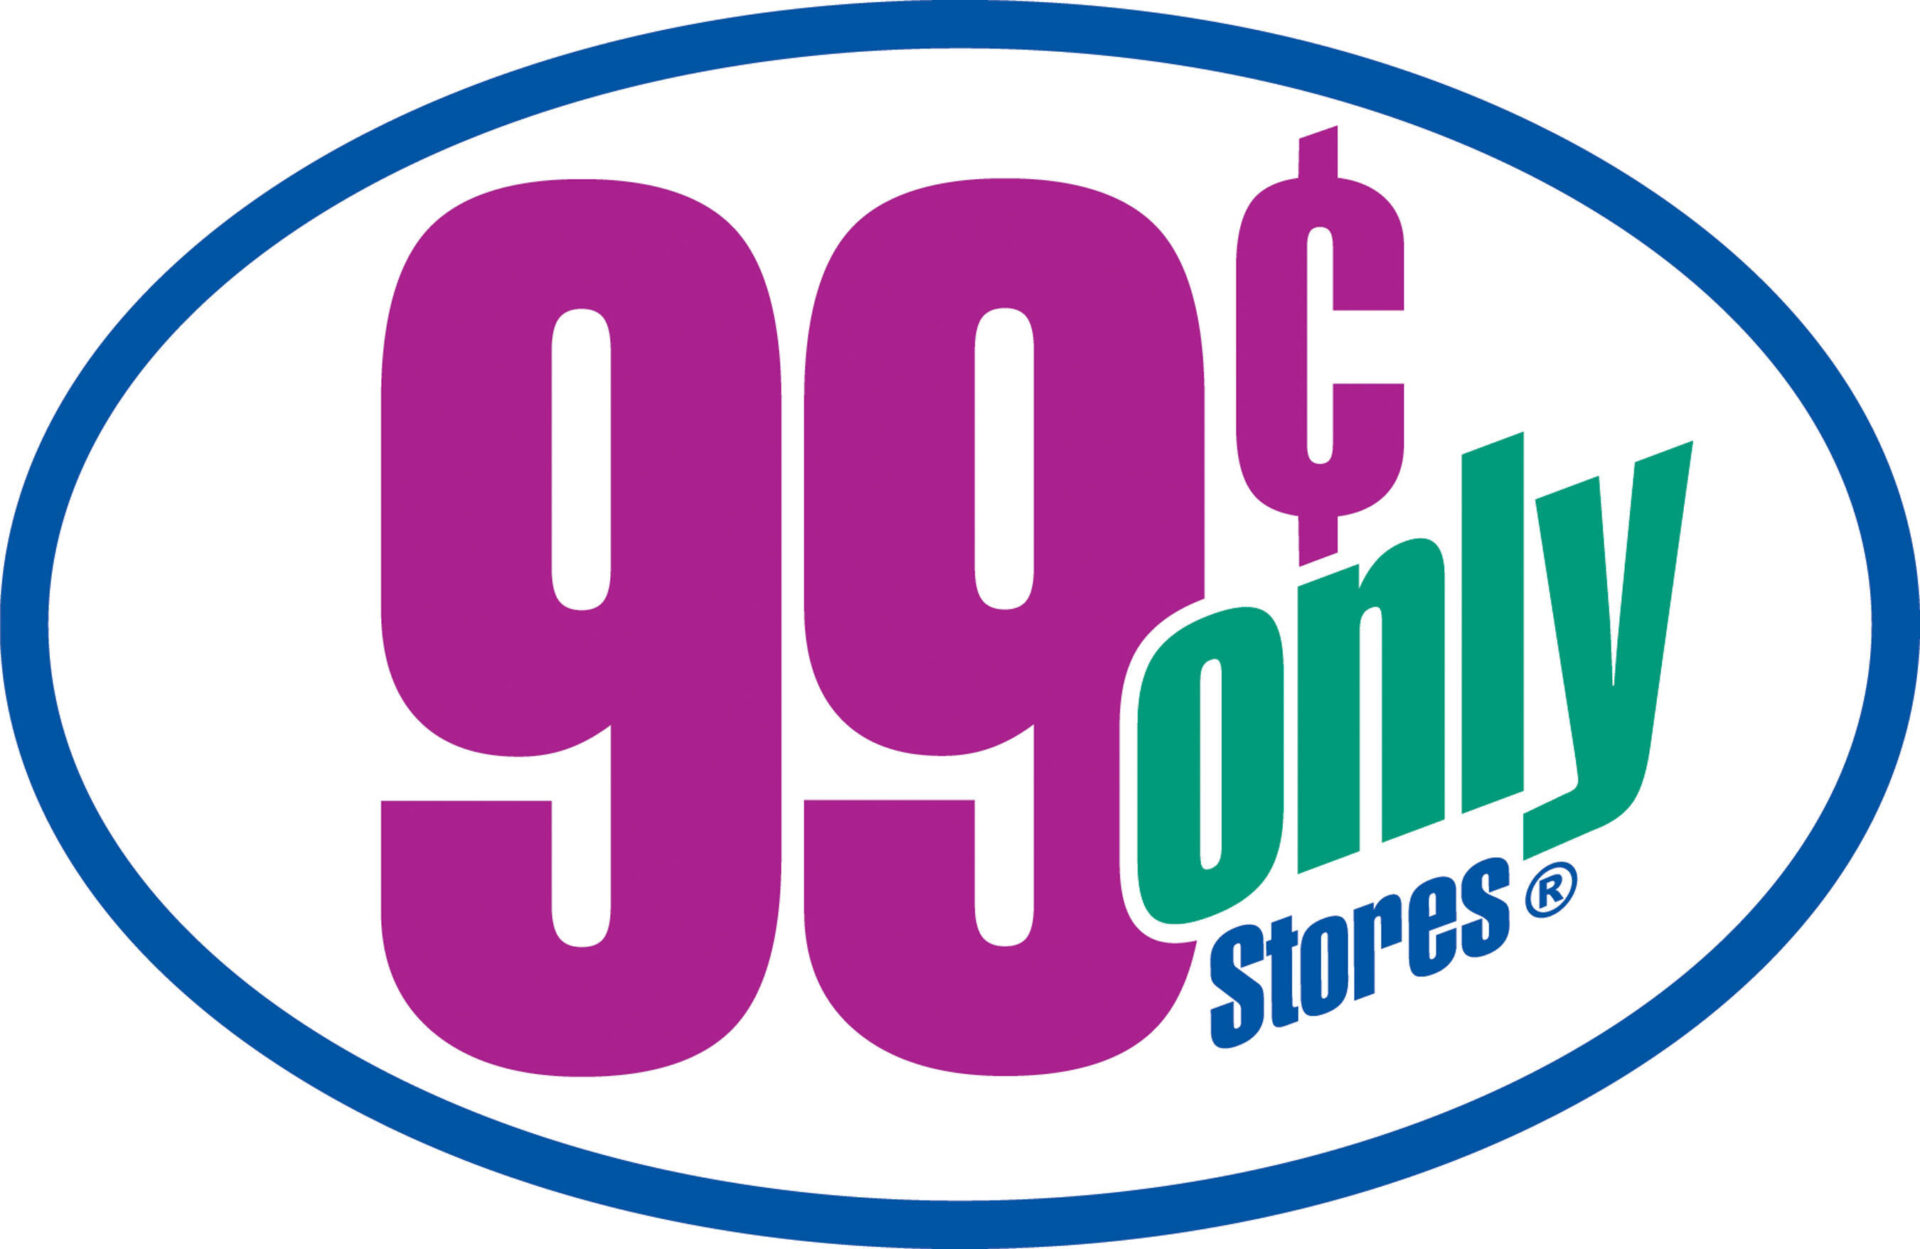 99 Cents Only Stores (PRNewsFoto/99 Cents Only Stores)